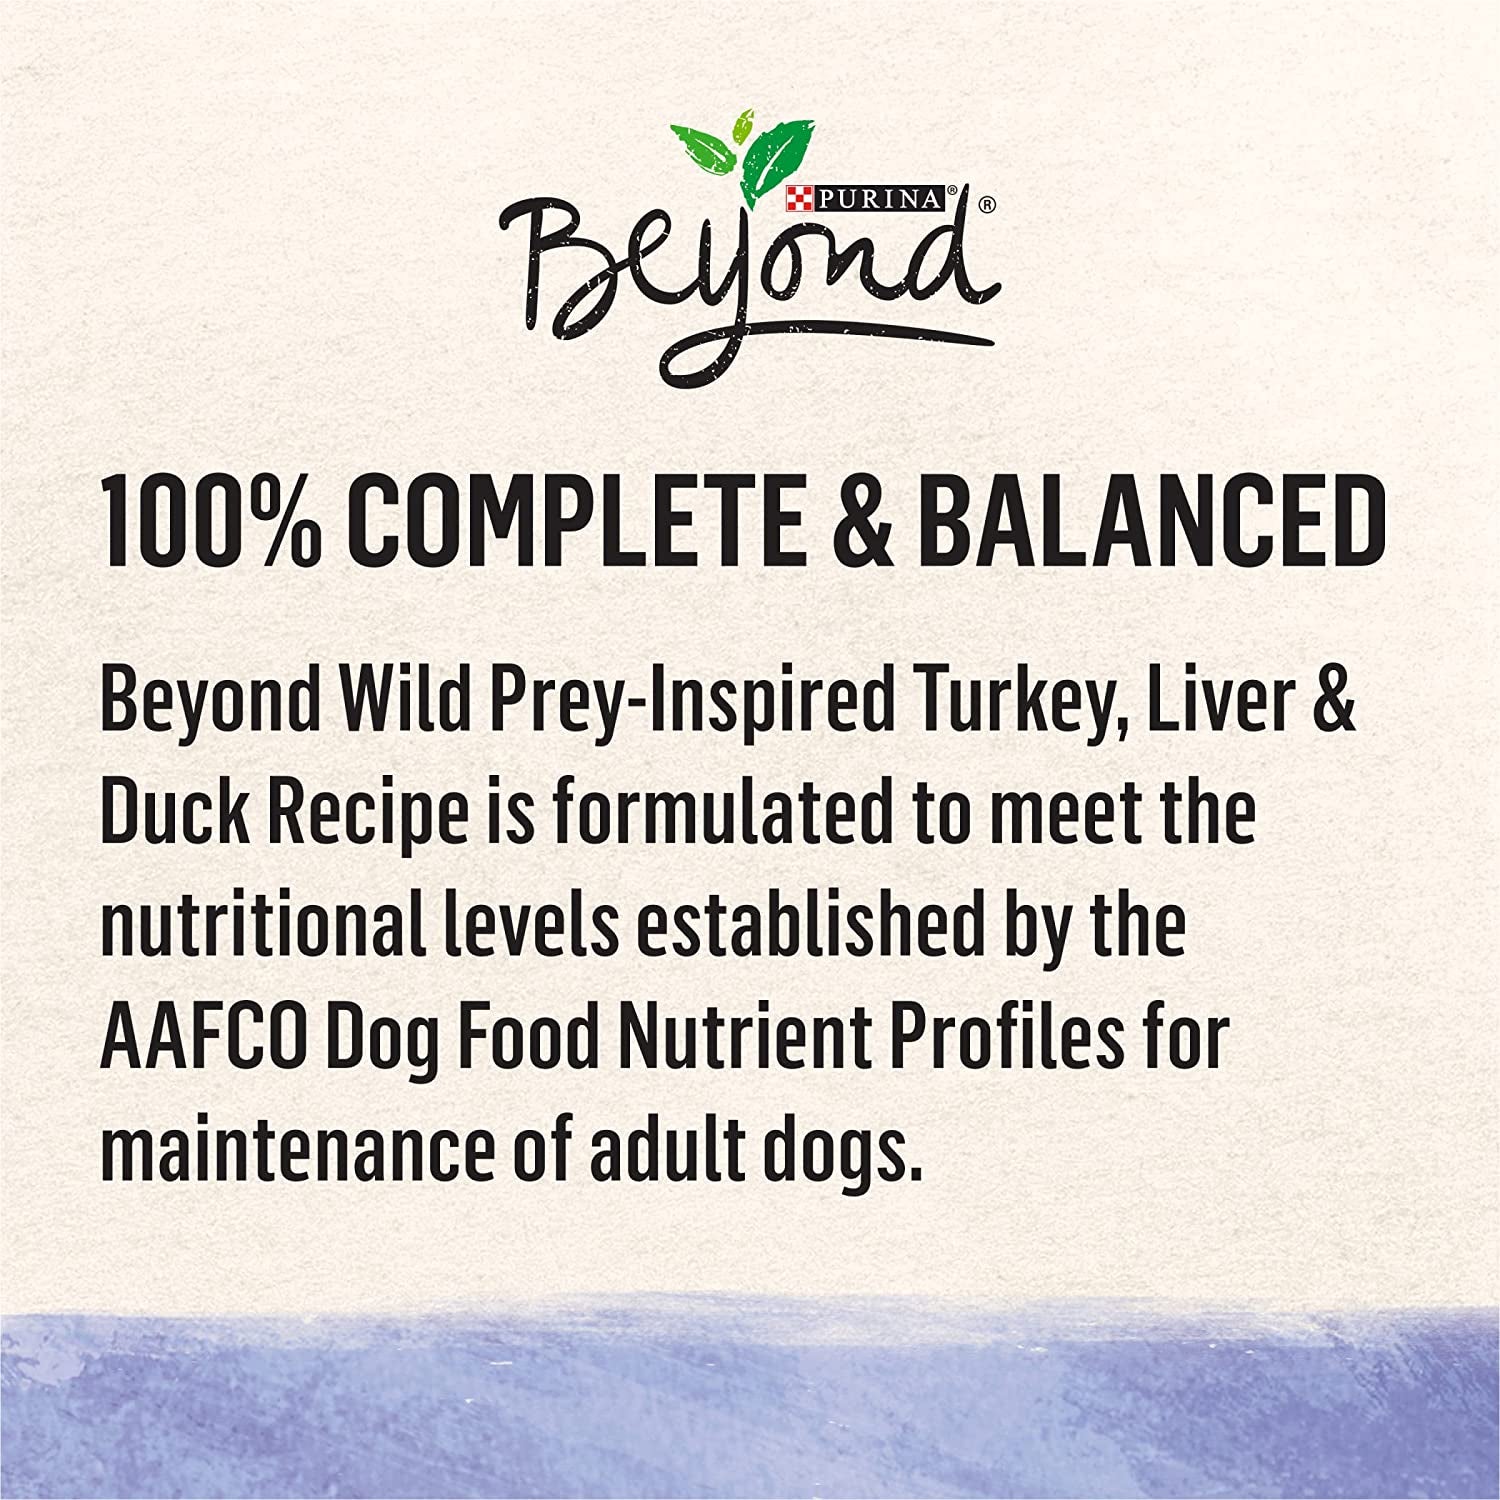 Purina beyond High Protein, Grain Free, Natural Pate Wet Dog Food, WILD Turkey, Liver & Duck Recipe - (12) 13 Oz. Cans